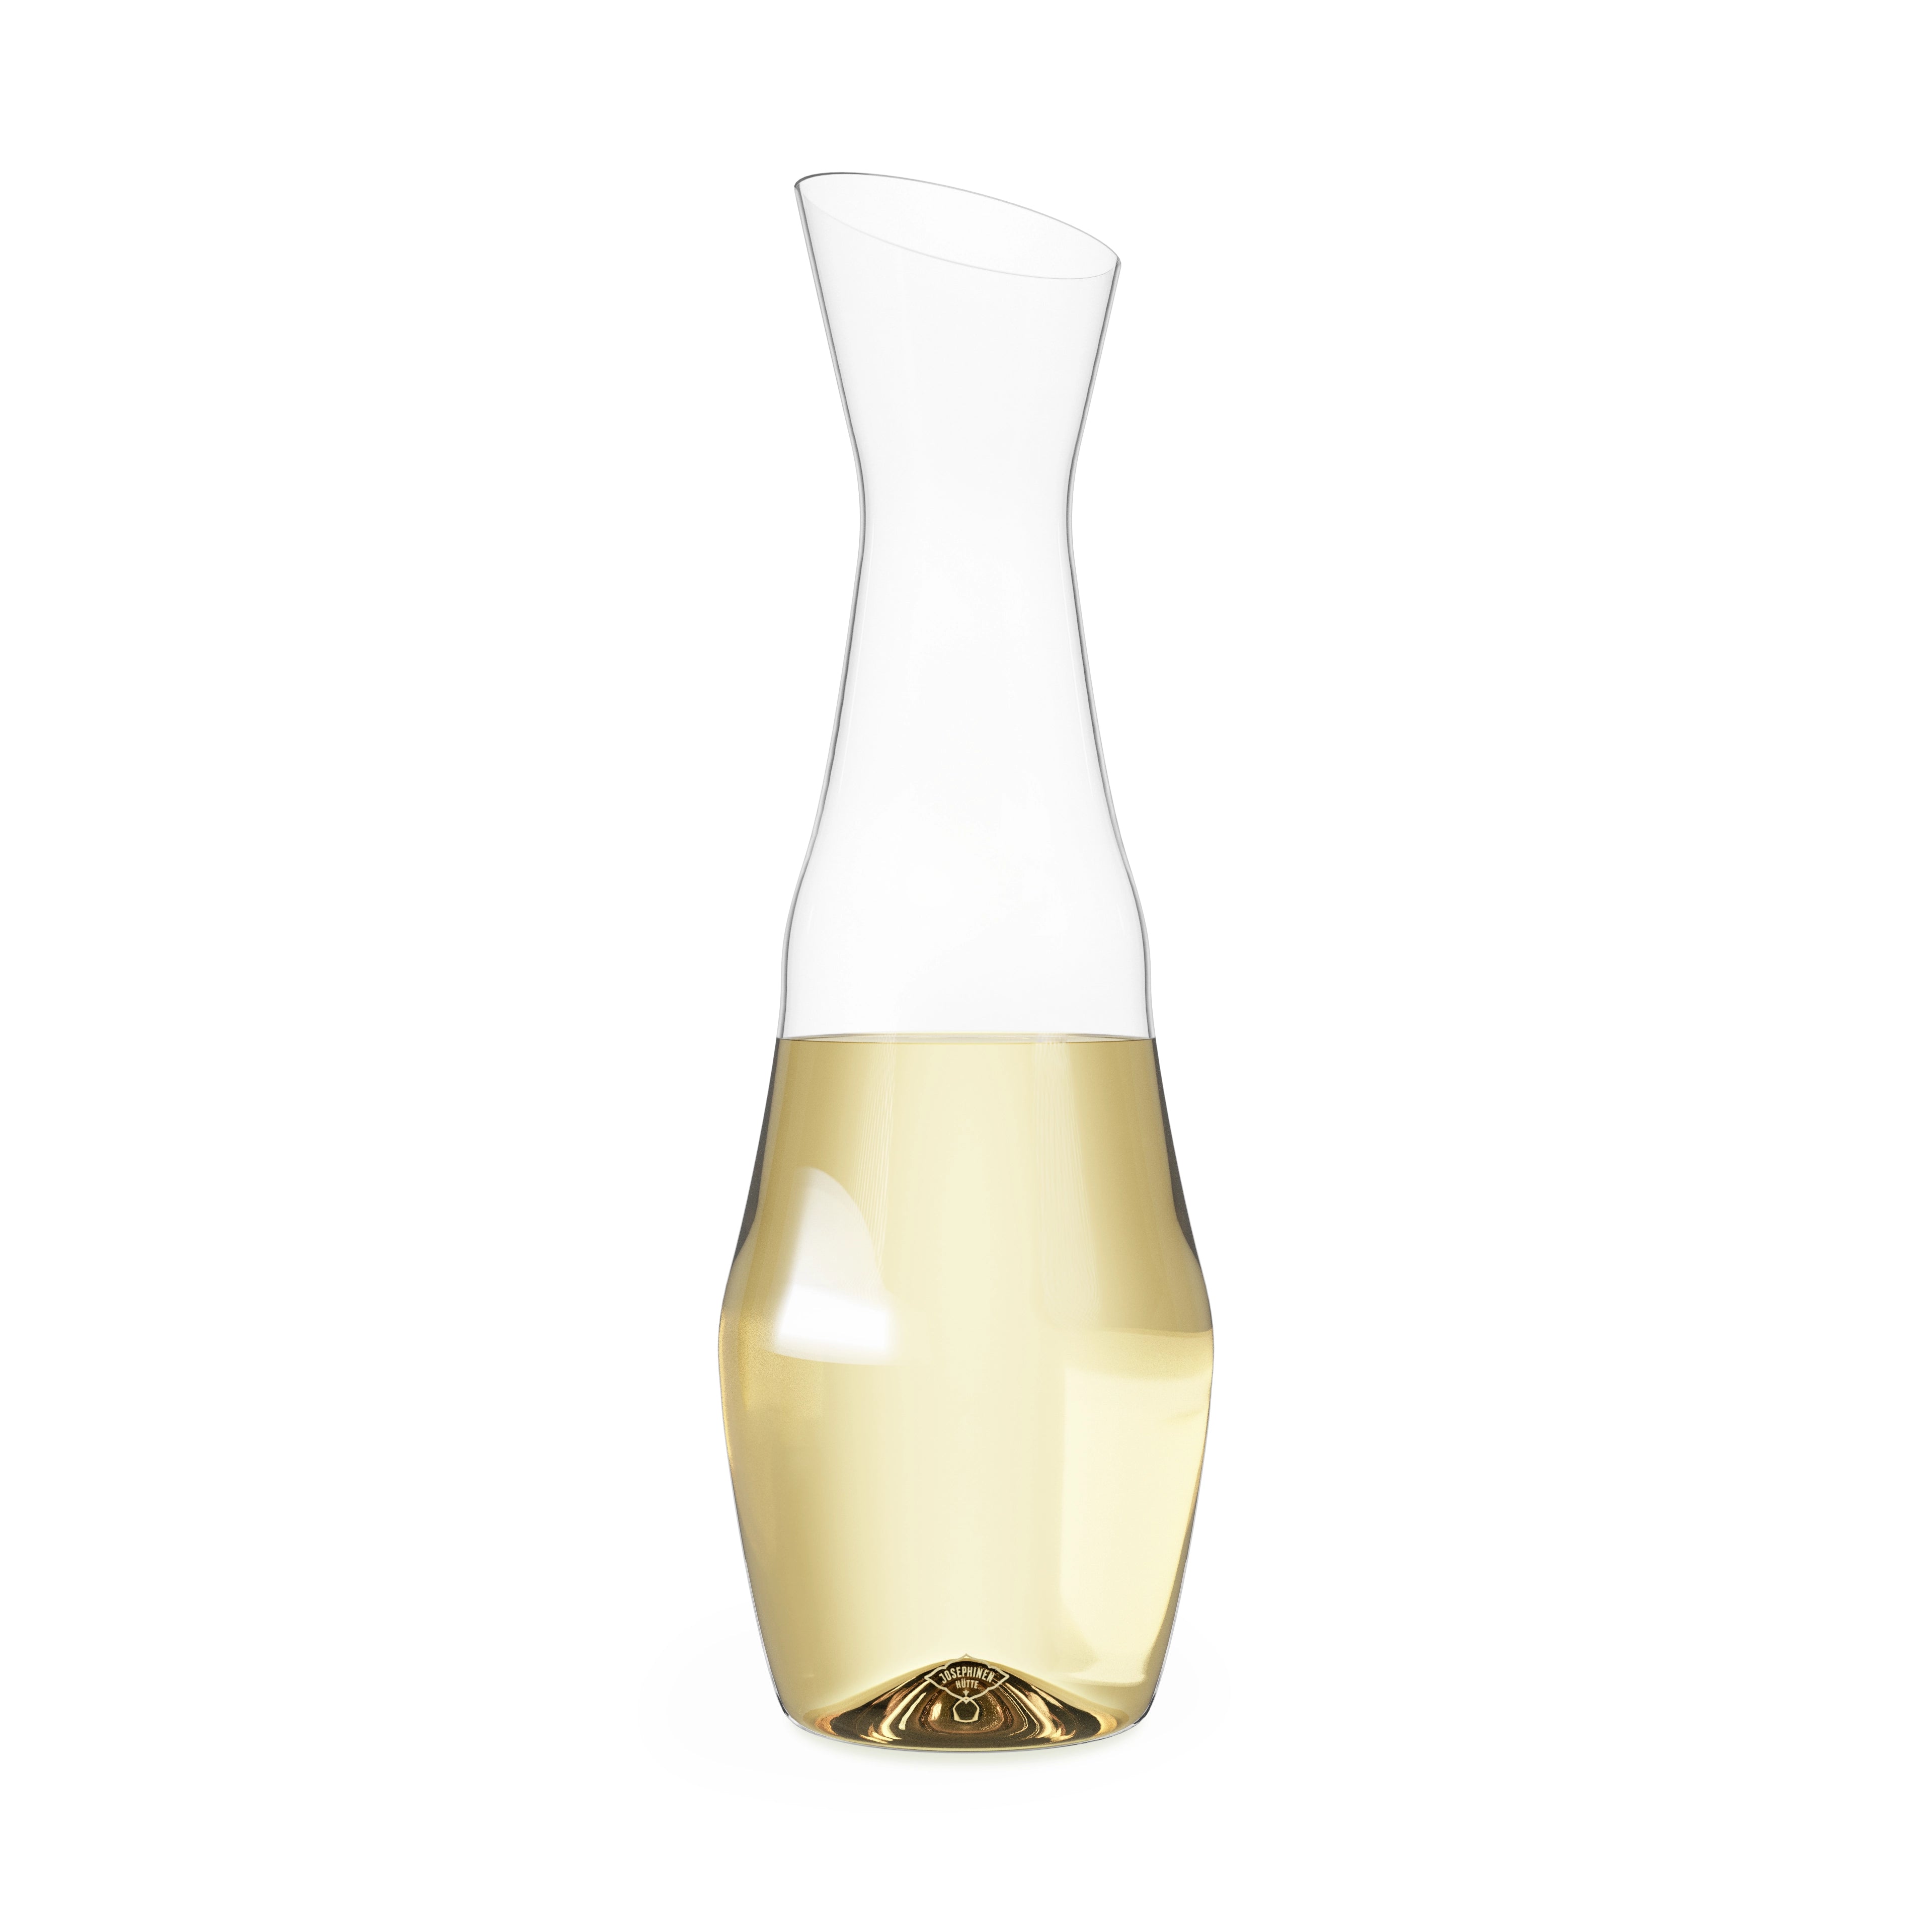 JOSEPHINE Carafe by Josephinenhütte, filled with white wine